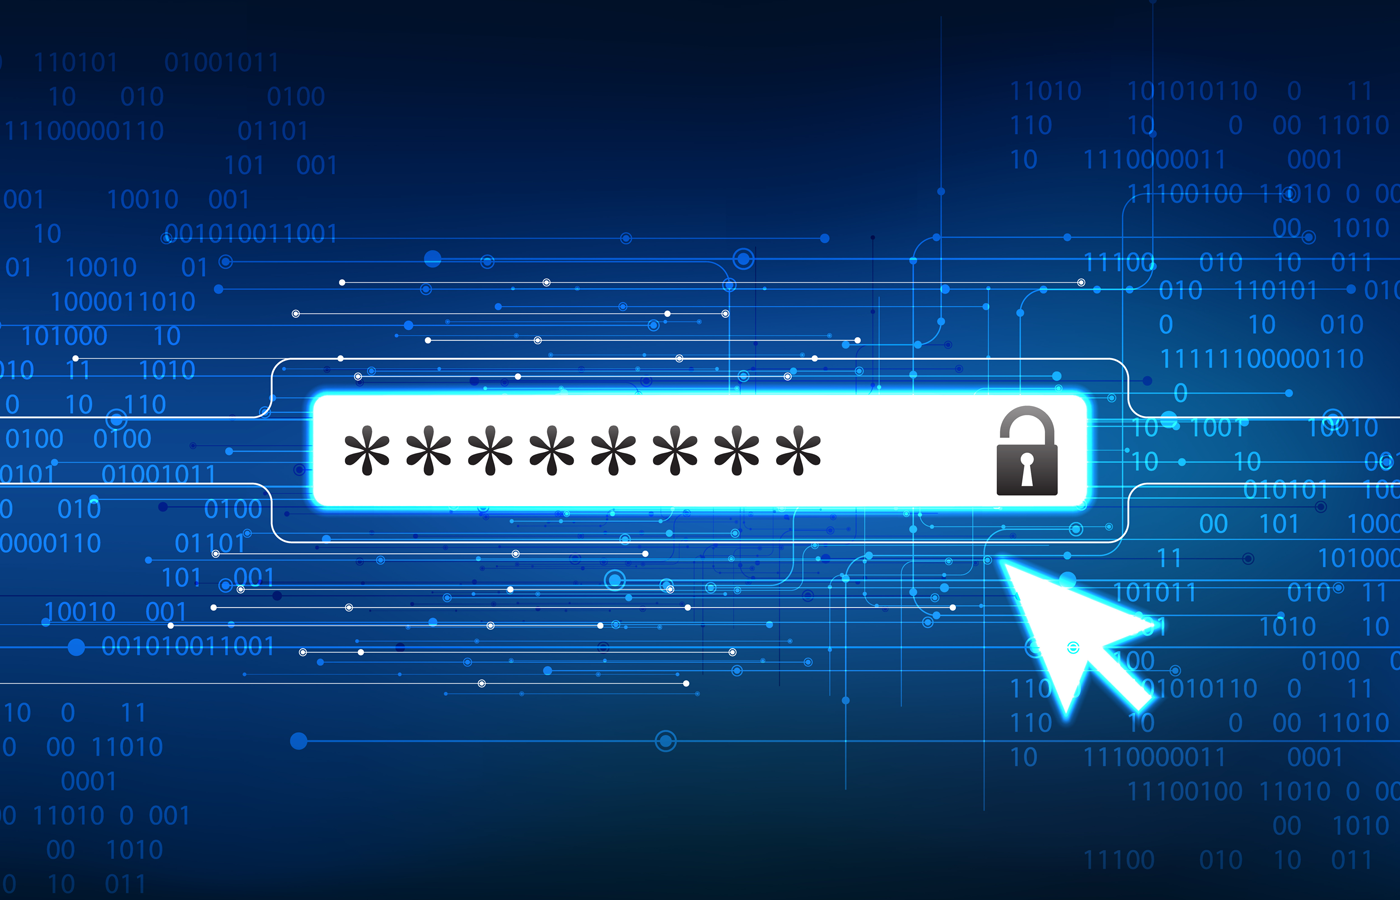 Vector illustration of an encrypted password field.